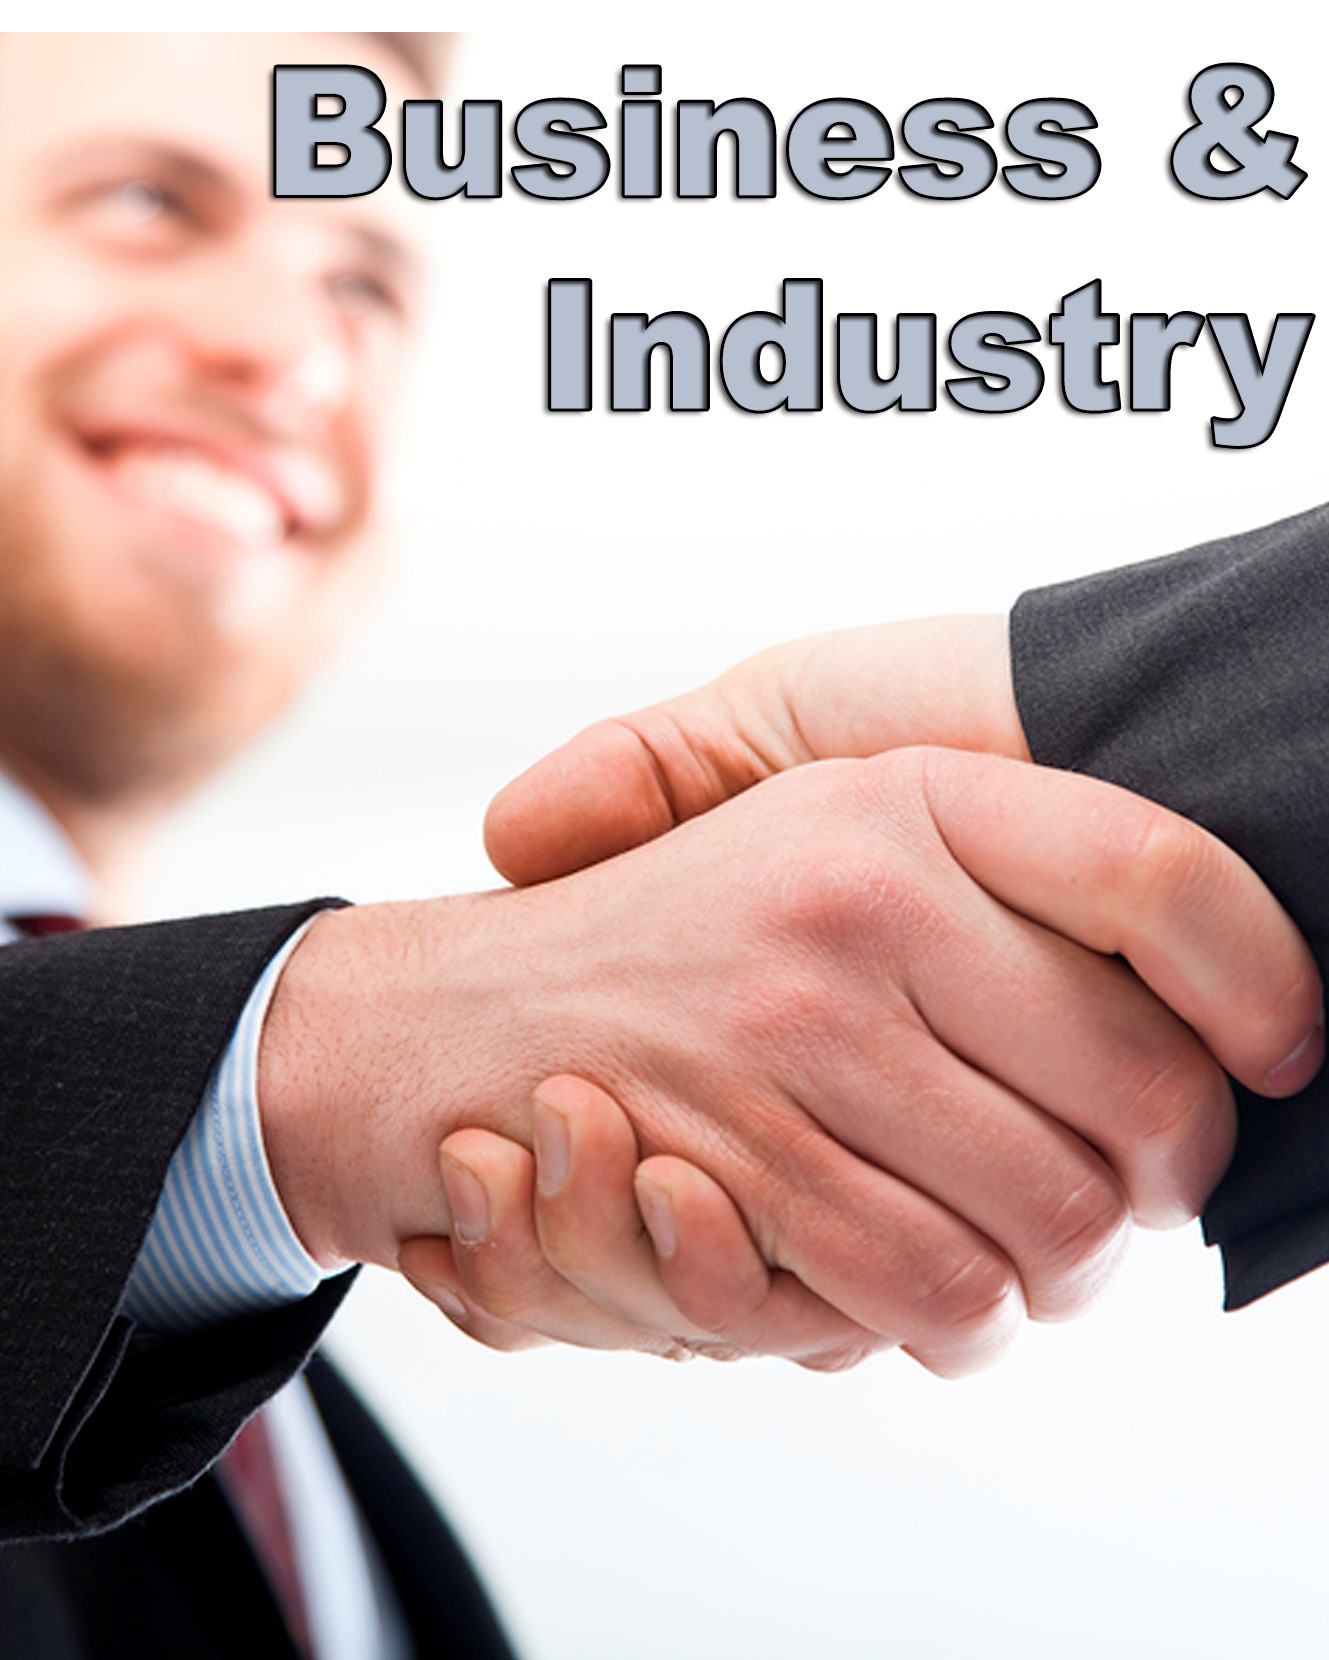 Business and Industry Sponsors